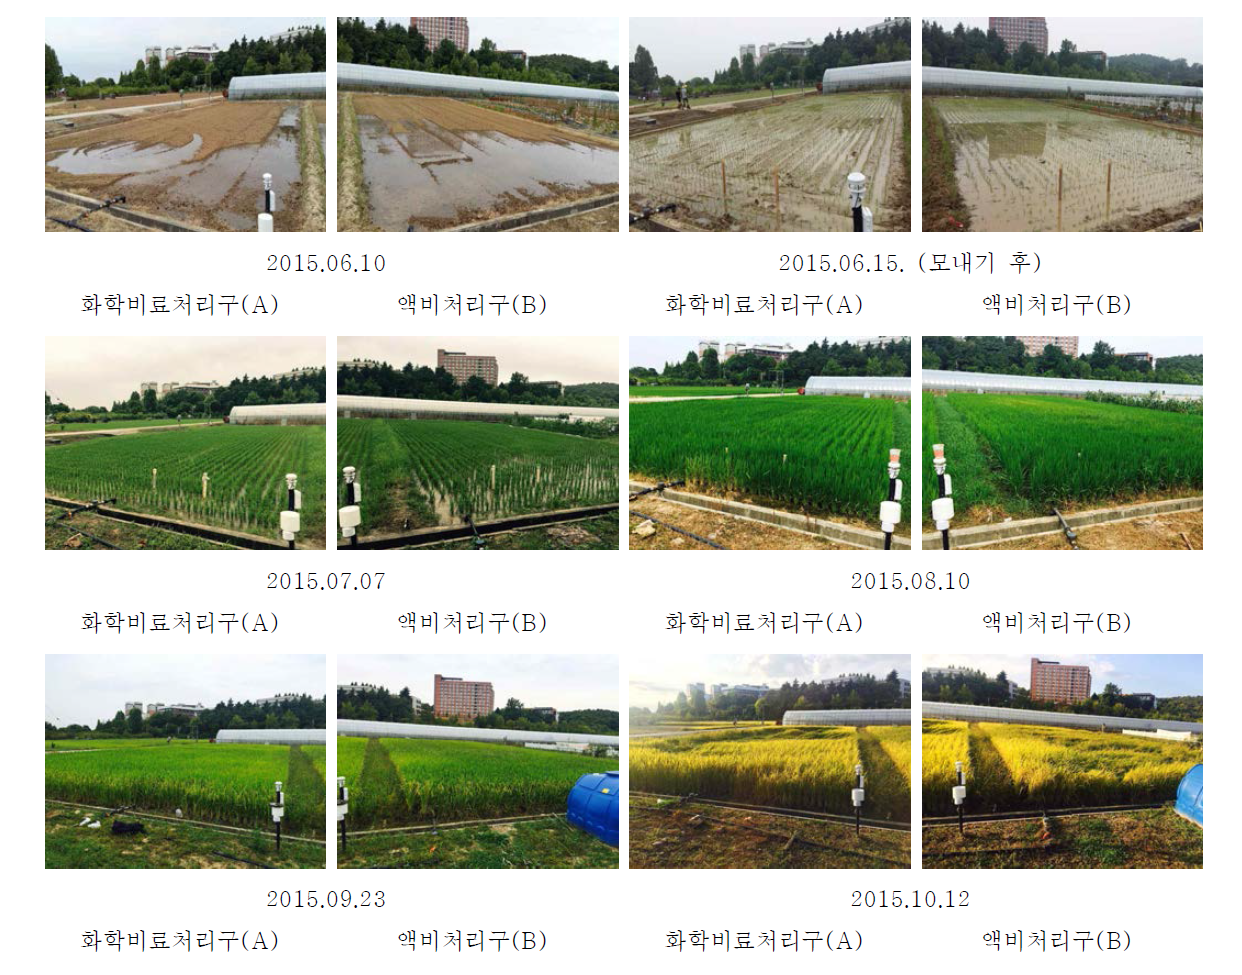 The view of agricultural activities at each treatment during 2015 cropping season